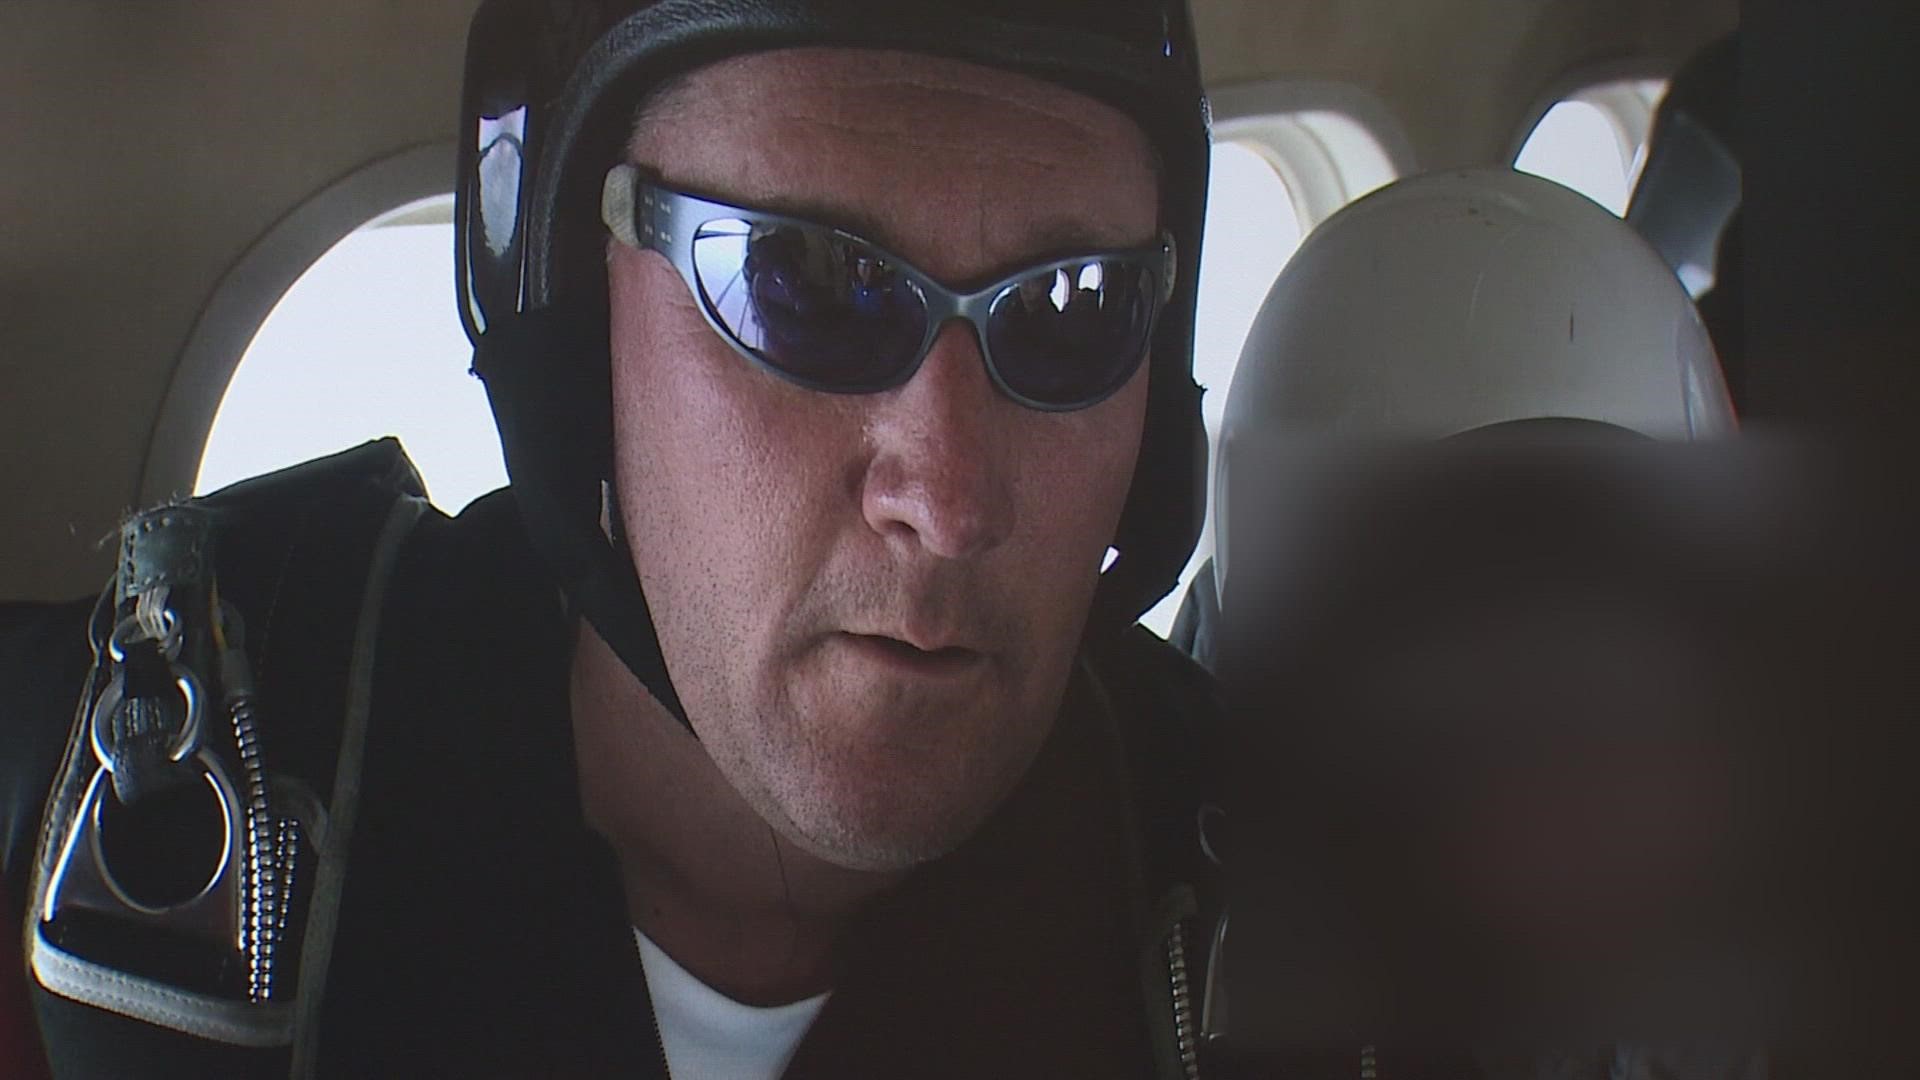 David Hartsock made his final jump on Aug. 1, 2009. It's a day that changed his life forever.